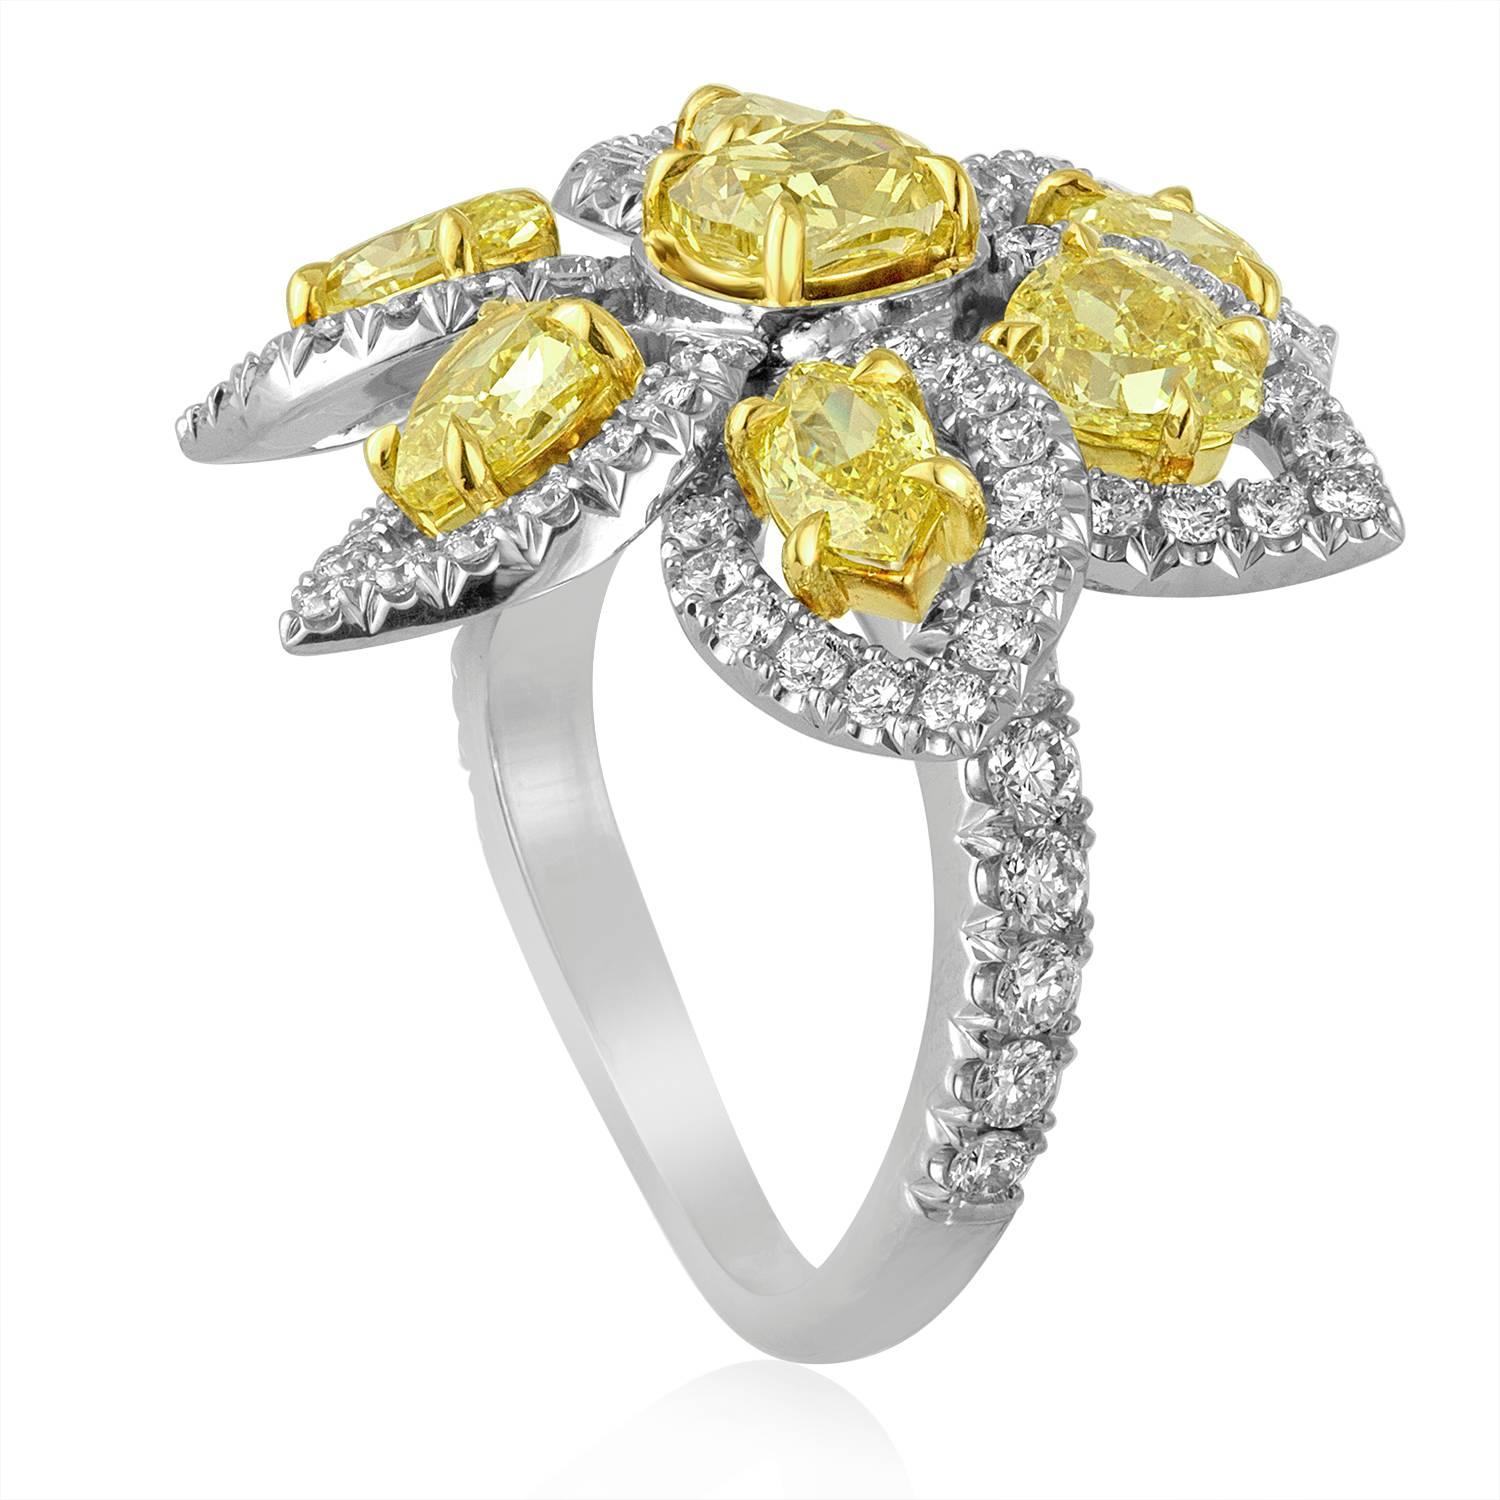 Very Beautiful & Exotic Flower Ring.
The ring is PLT 950/18K White & Yellow Gold
There are 3.46 Carats in Natural Fancy Yellow Diamonds VS Clarity
There are 1.78 Carats in White Diamonds F VS
The ring is a size 7, not sizable.
The flower top is